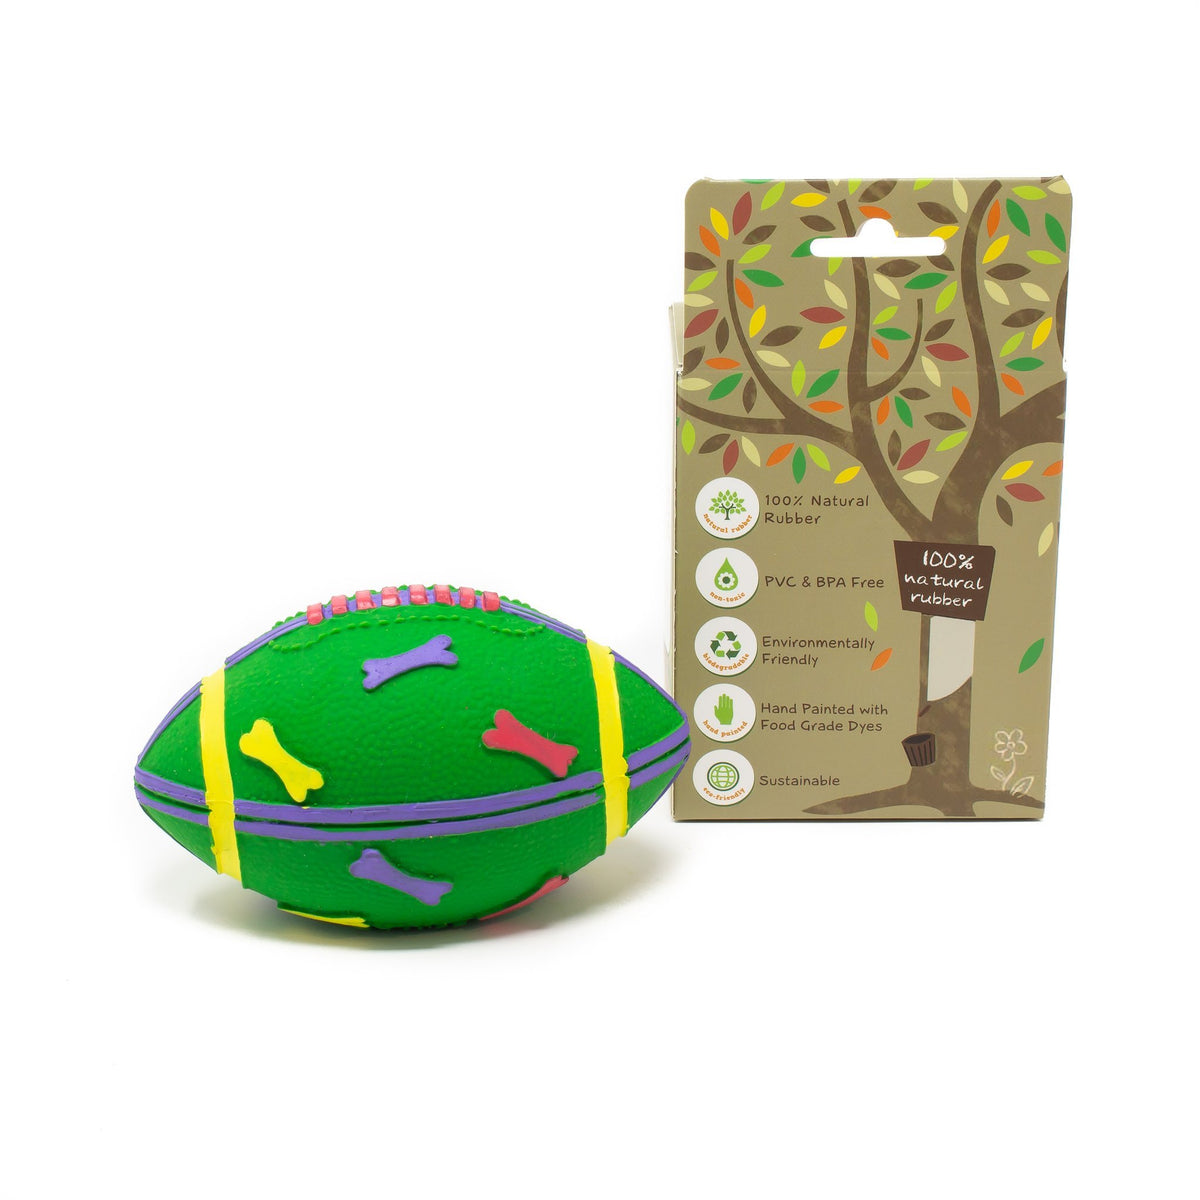 Rugby ball Green - Natural Rubber Toys